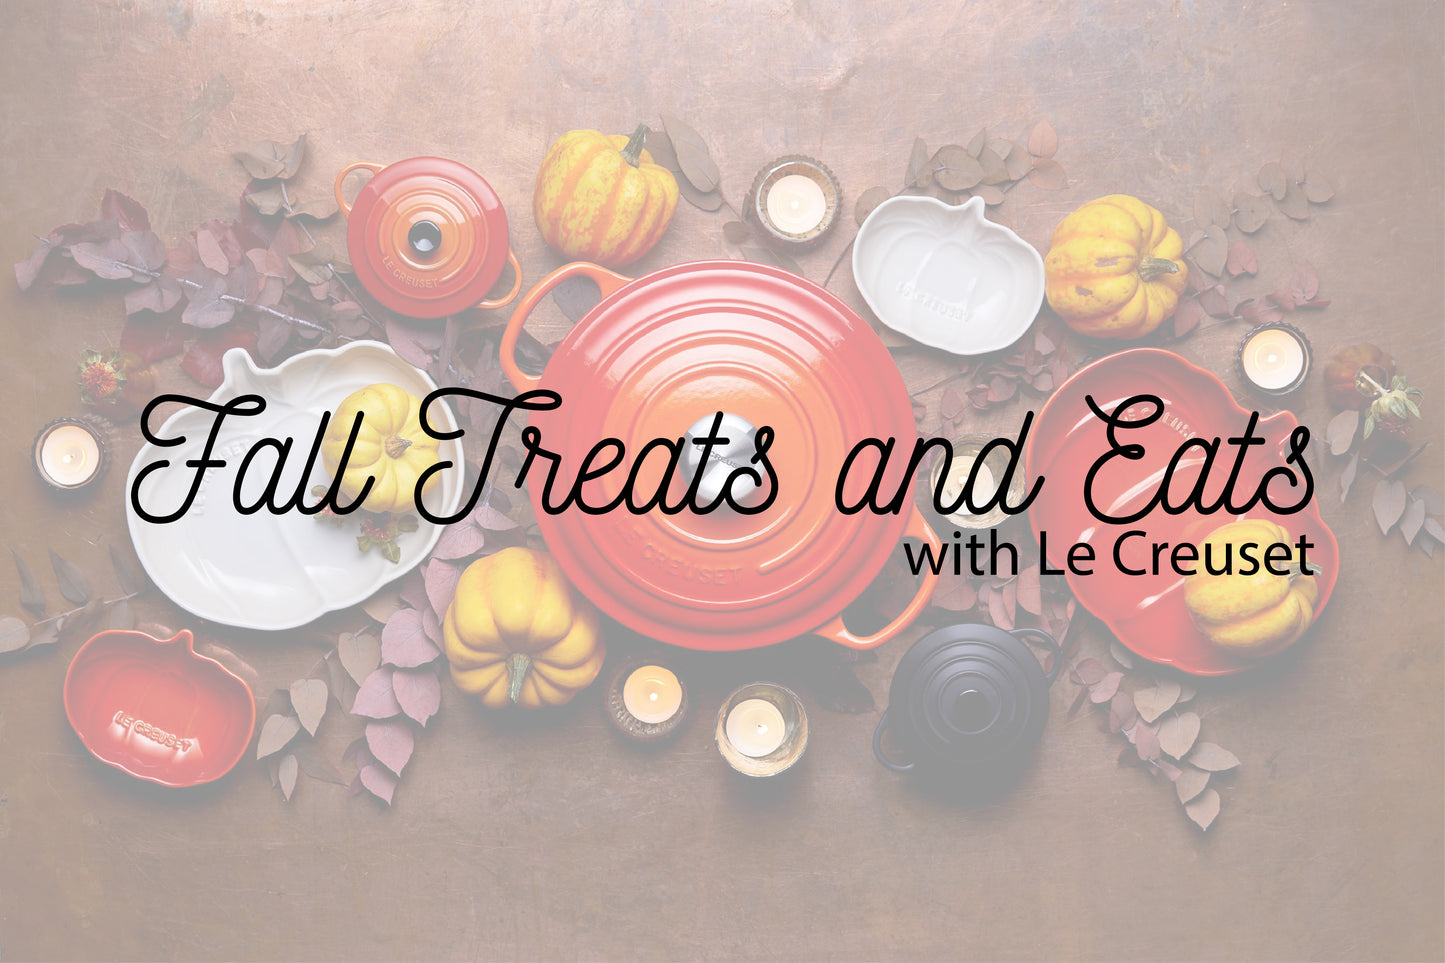 Register for Fall Treats and Eats with Le Creuset